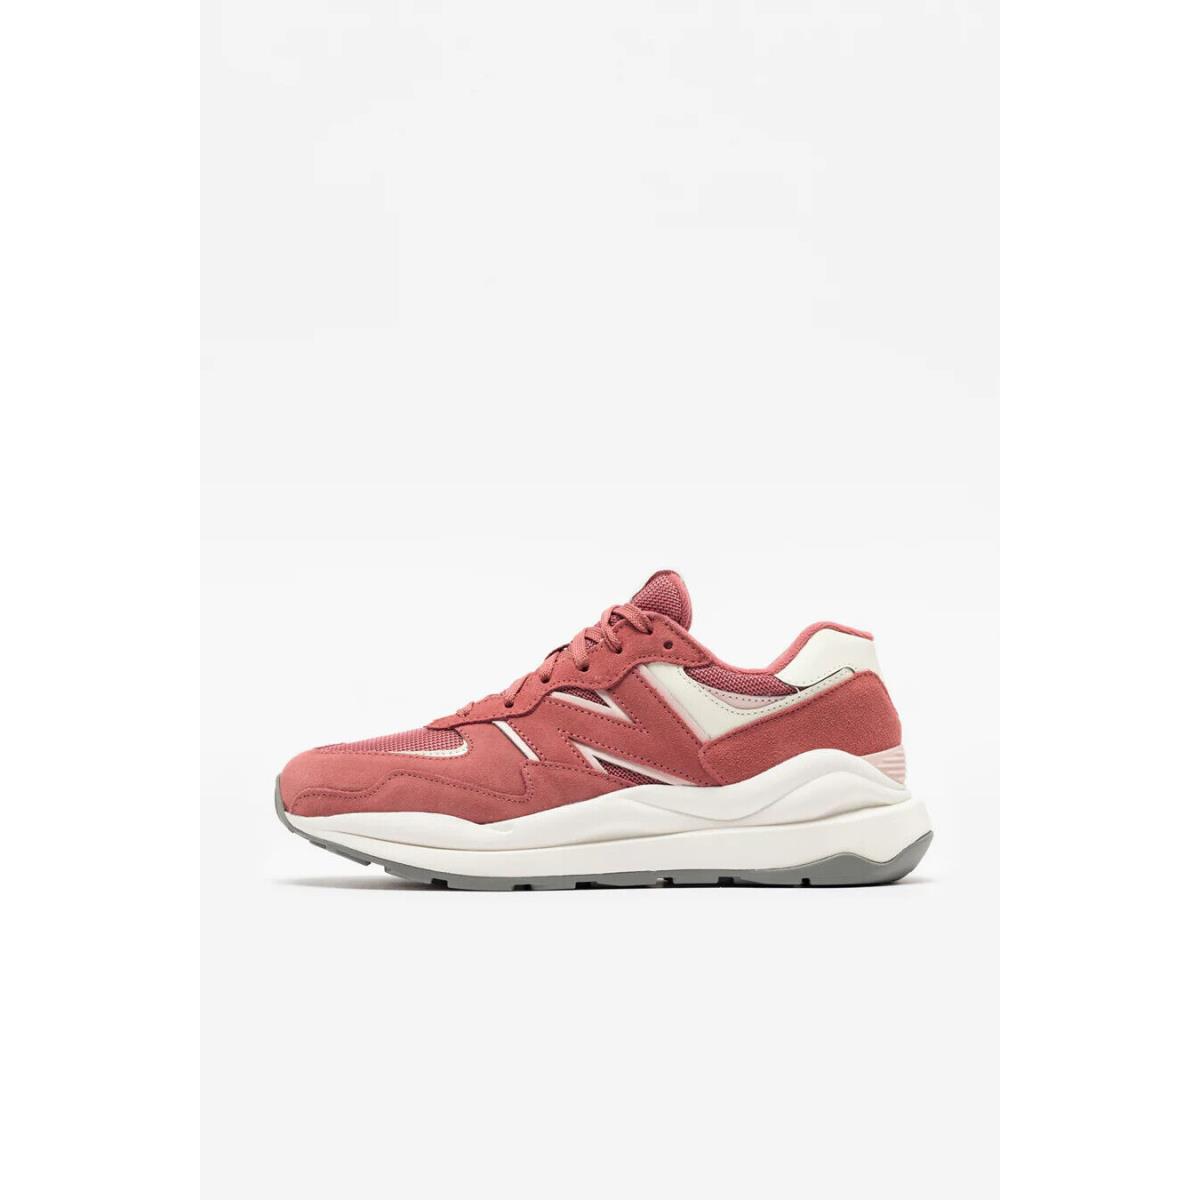 New Balance shoes  - Henna/Oyster Pink 8